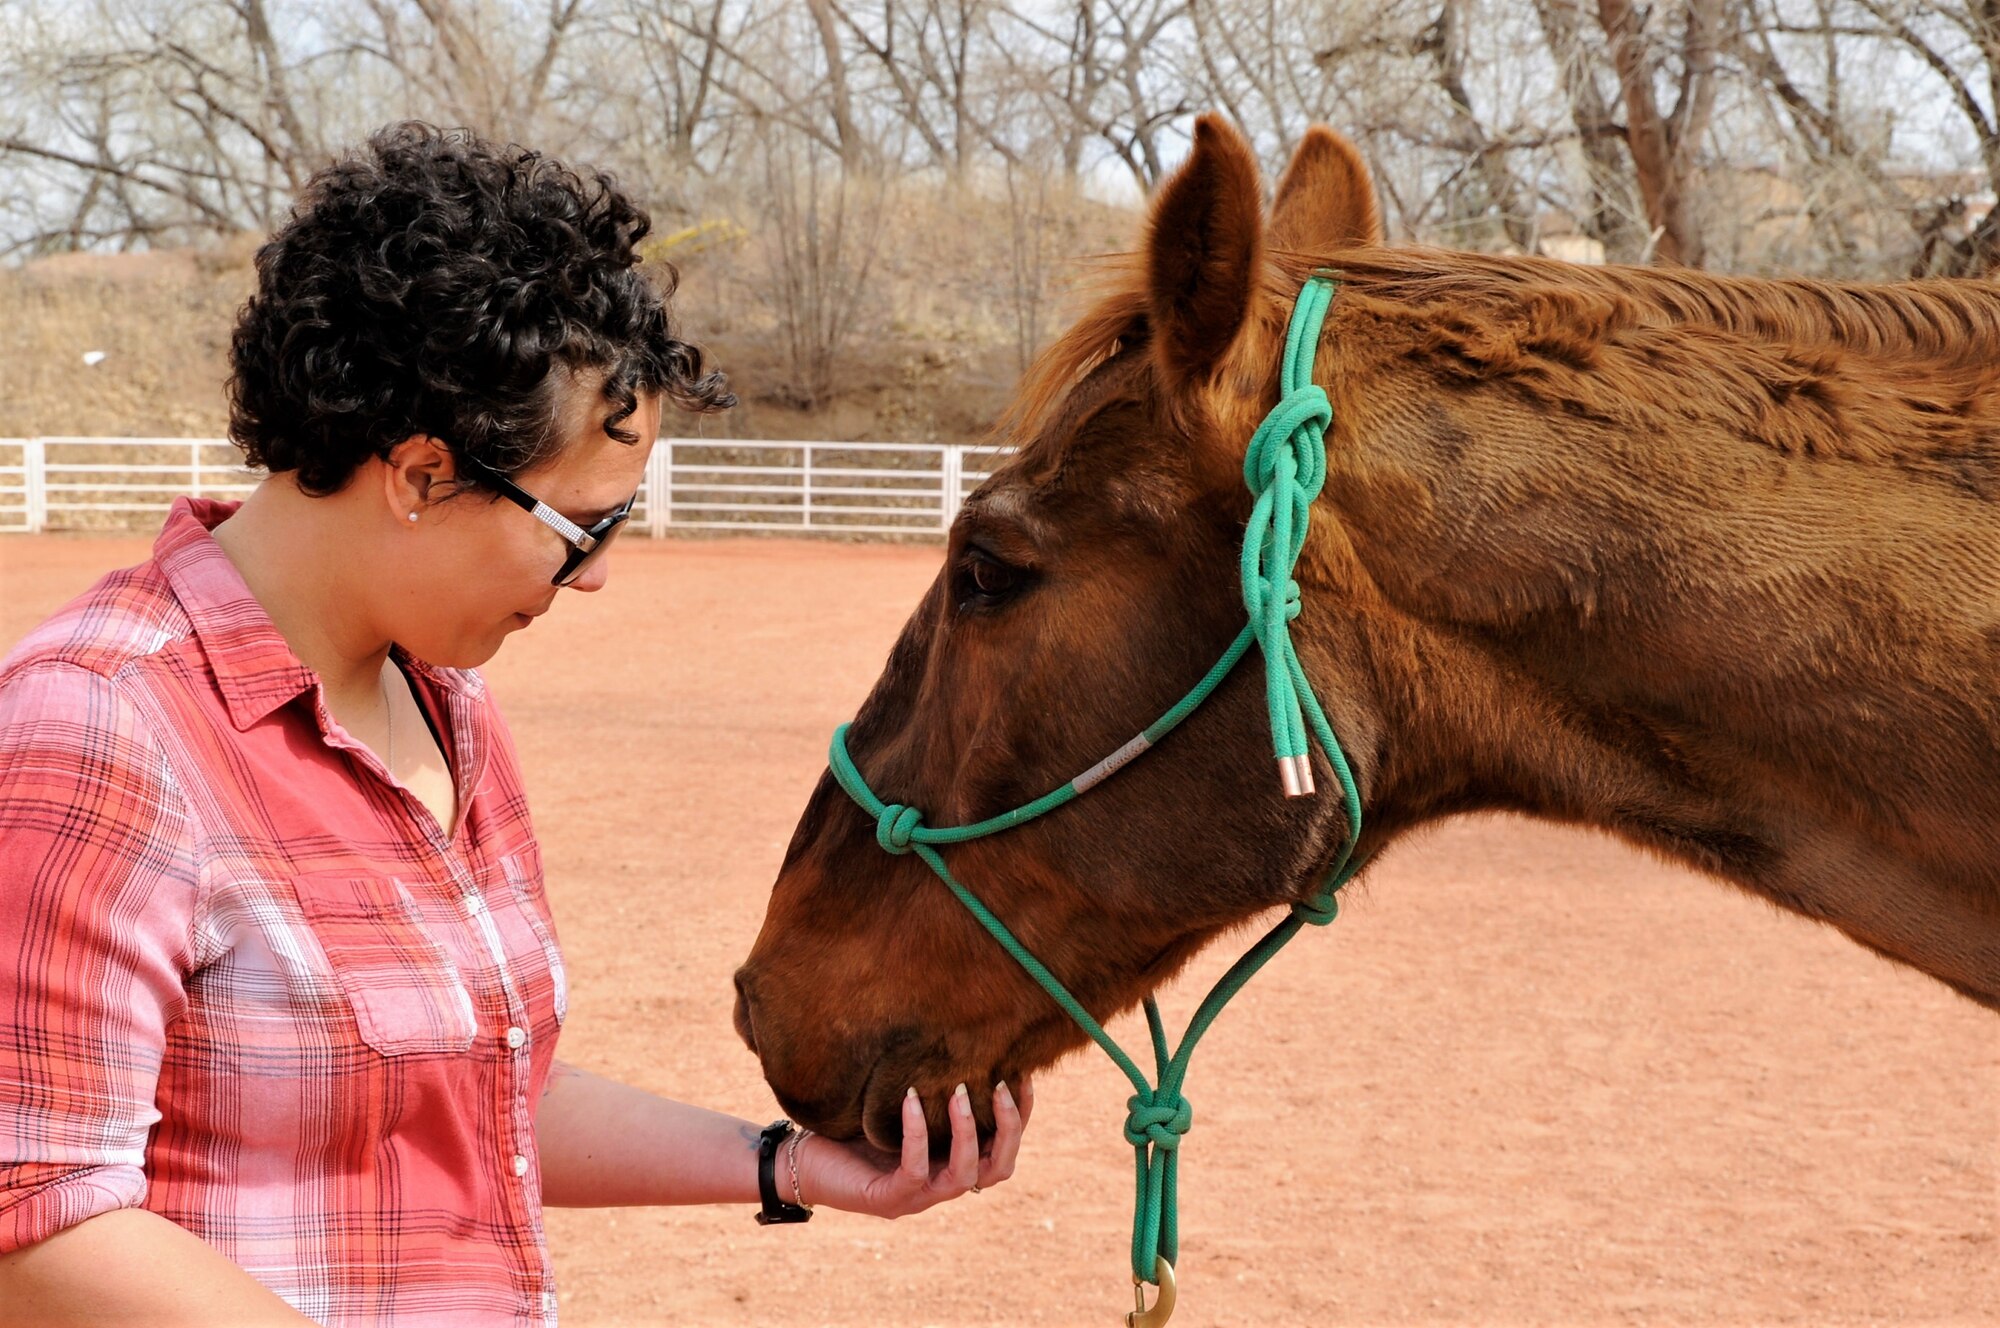 Tech. Sgt. Tanesha Fierro, an Air Force Reservist assigned to the 34th Aeromedical Evacuation Squadron, scratches a horse’s chin during an equine therapy session at the Norris Penrose Events Center in Colorado Springs, Colorado, April 4, 2018.